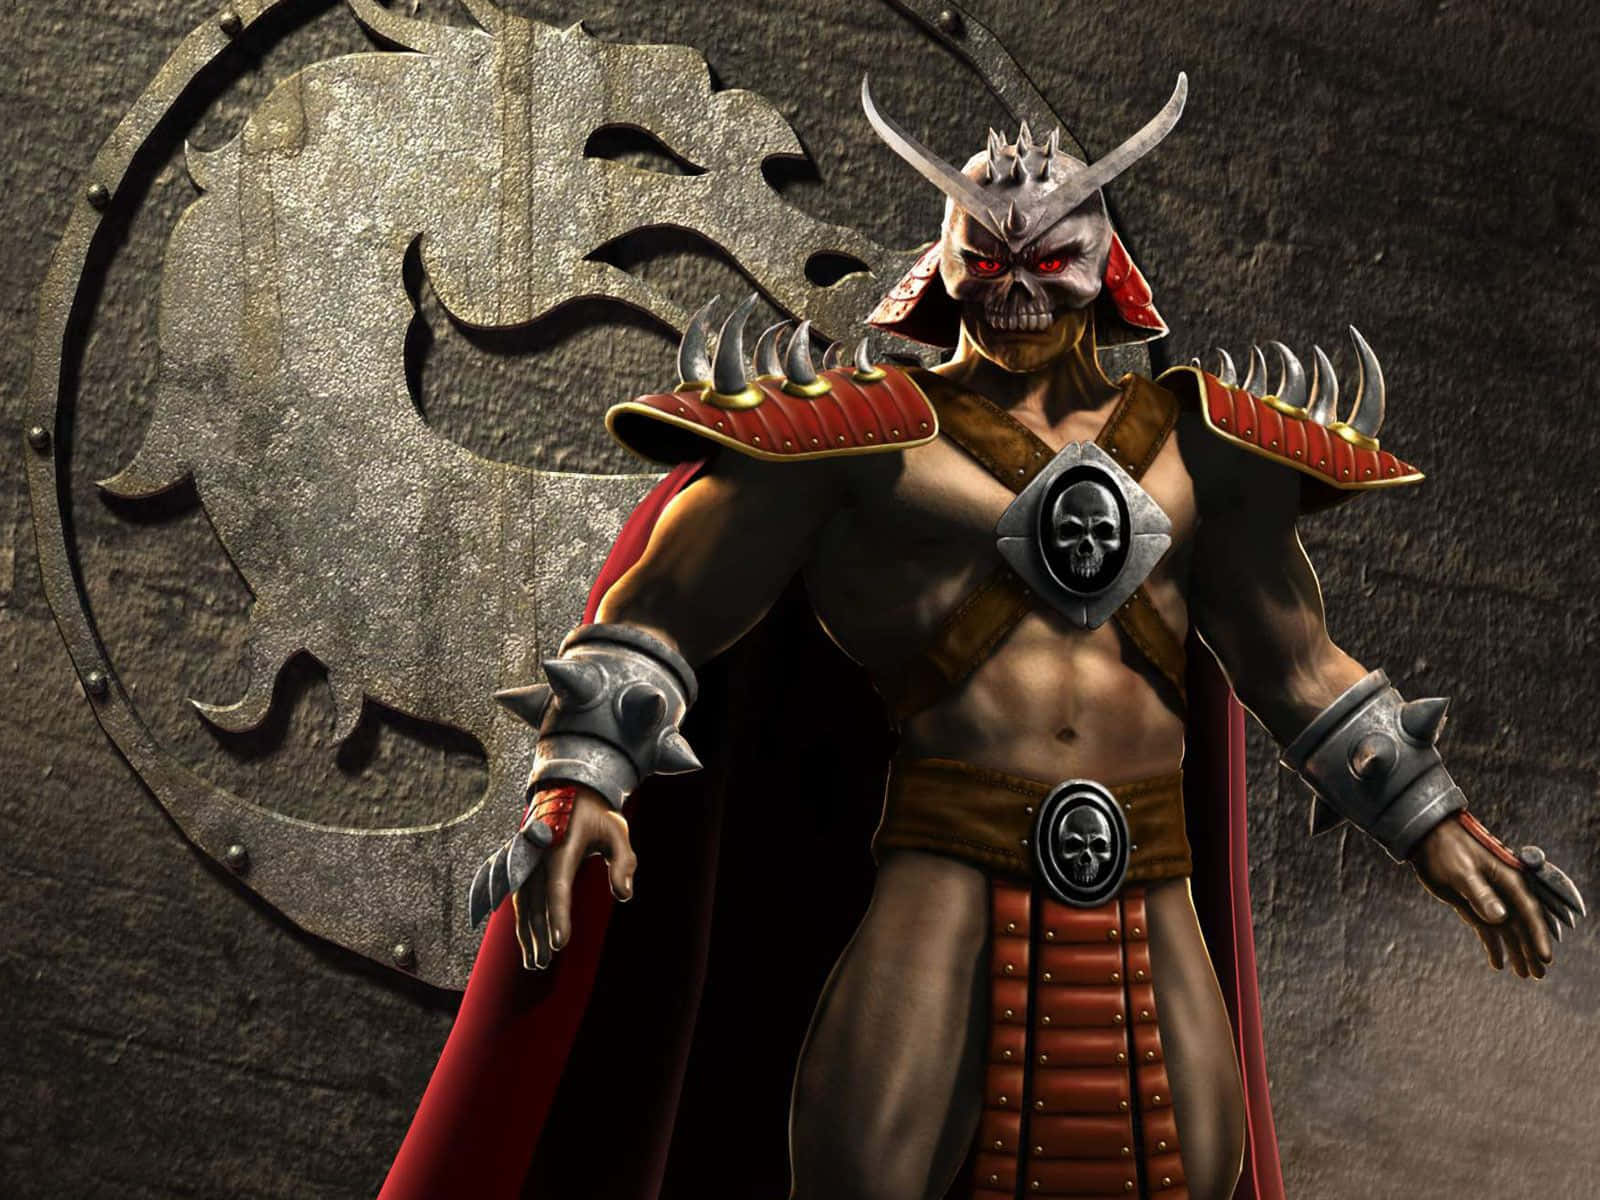 Mighty Goro, the feared four-armed warrior from Mortal Kombat Wallpaper